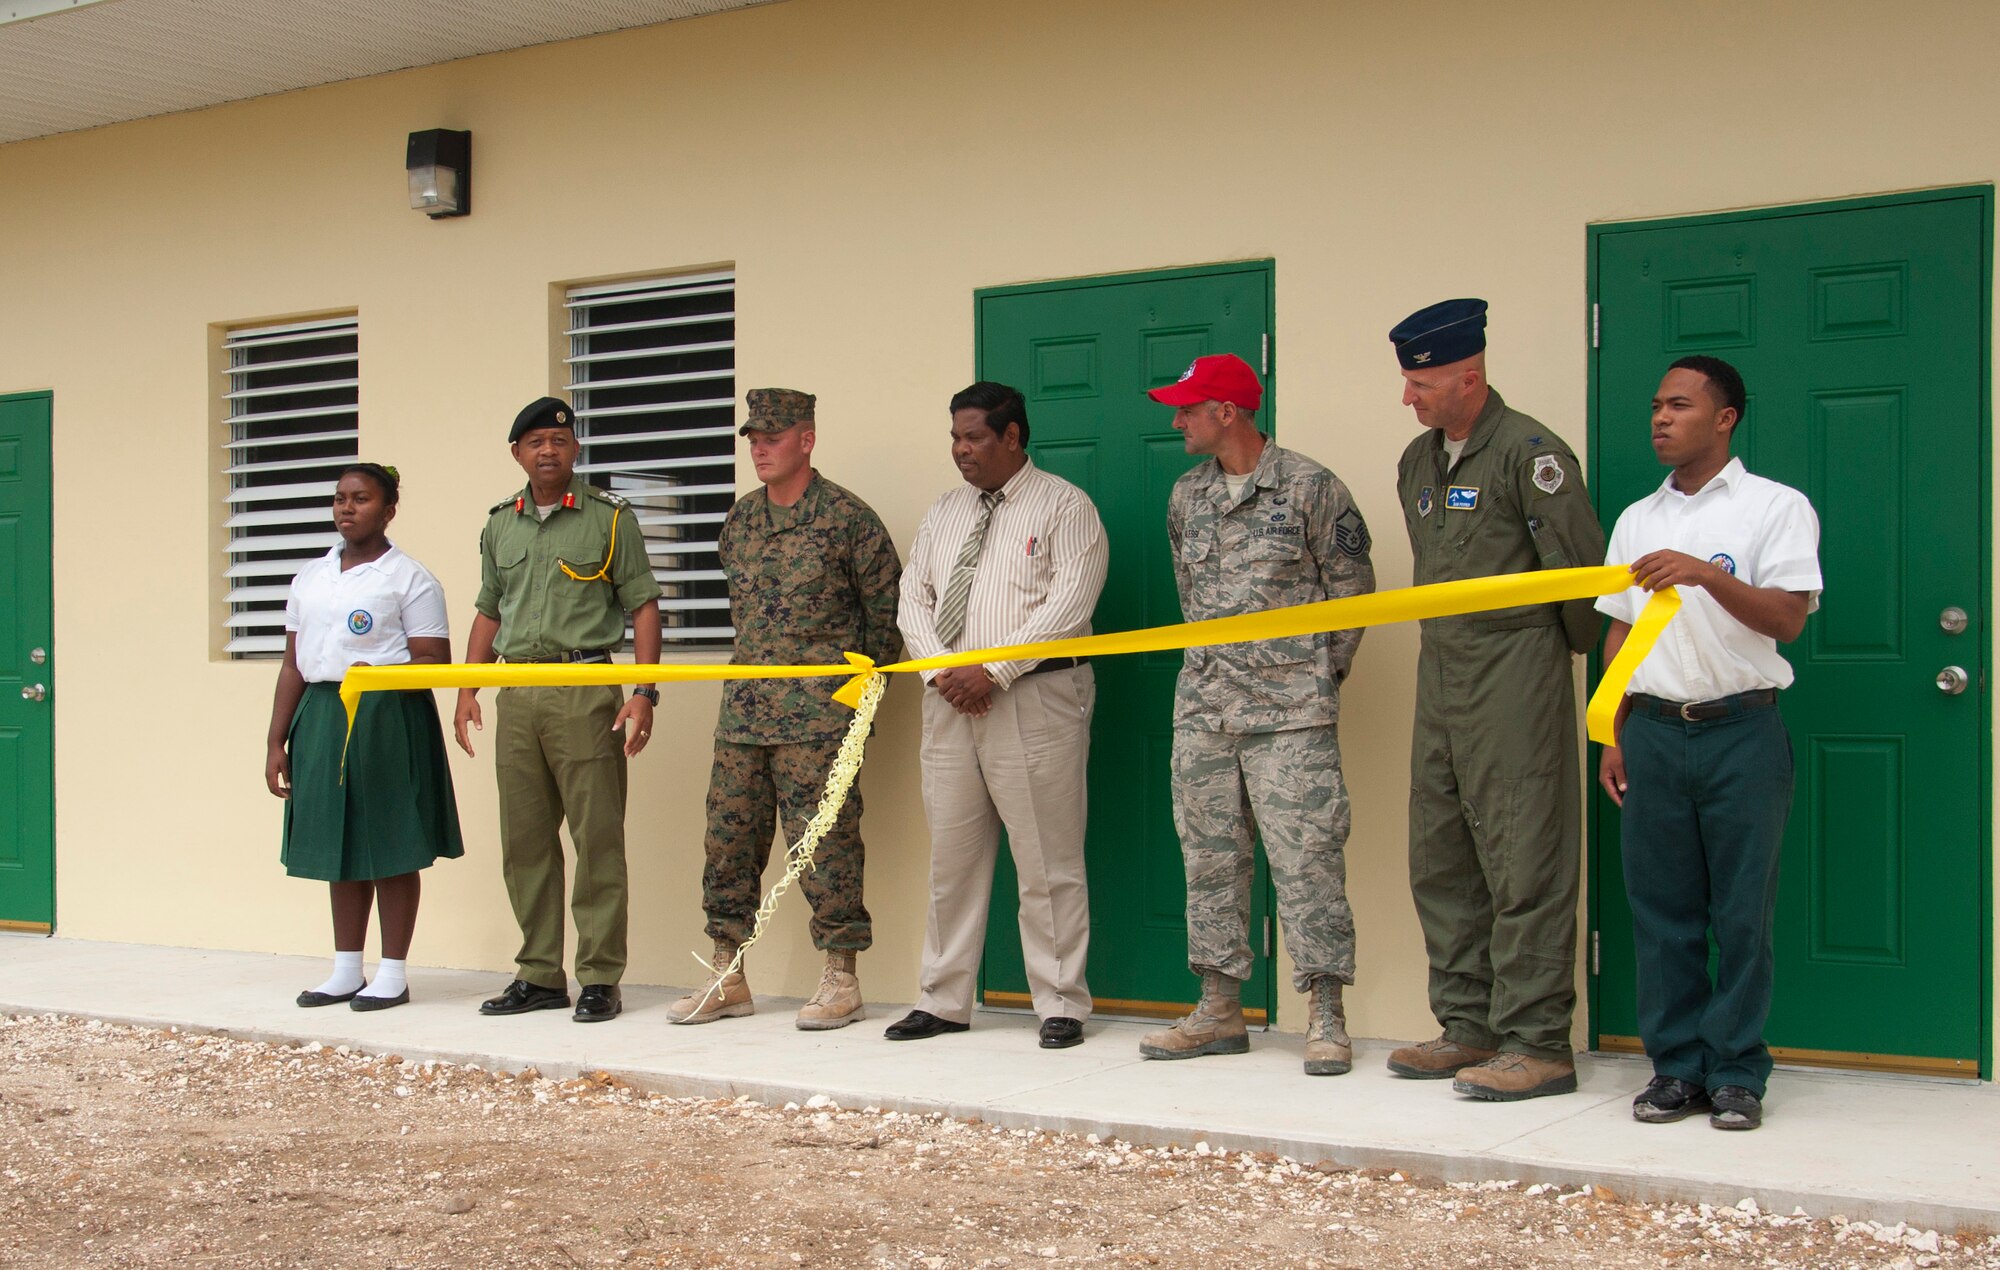 One each end, an Edward P. Yorke student holds a yellow ribbon as, from left, Belize Defence Force Gen. David Jones, BDF commander, U.S. Marine Corps Staff Sgt. Matt Houle, construction site foreman, Rodrick Cardinez, E.P. Yorke principal, U.S. Air Force Master Sgt. Nicholas Alessi, construction site project manager, and U.S. Air Force Col. Dan Pepper, New Horizons Task Force commander, participate in the ribbon cutting ceremony at the school June 4, 2014, in Belize City, Belize. The school's 1,372 square foot, two-classroom addition is one of five New Horizons projects in the country. New Horizons is an annual multinational exercise that provides training opportunities in civil engineering and medical care. (U.S. Air Force photo by Tech. Sgt. Kali L. Gradishar/Released)